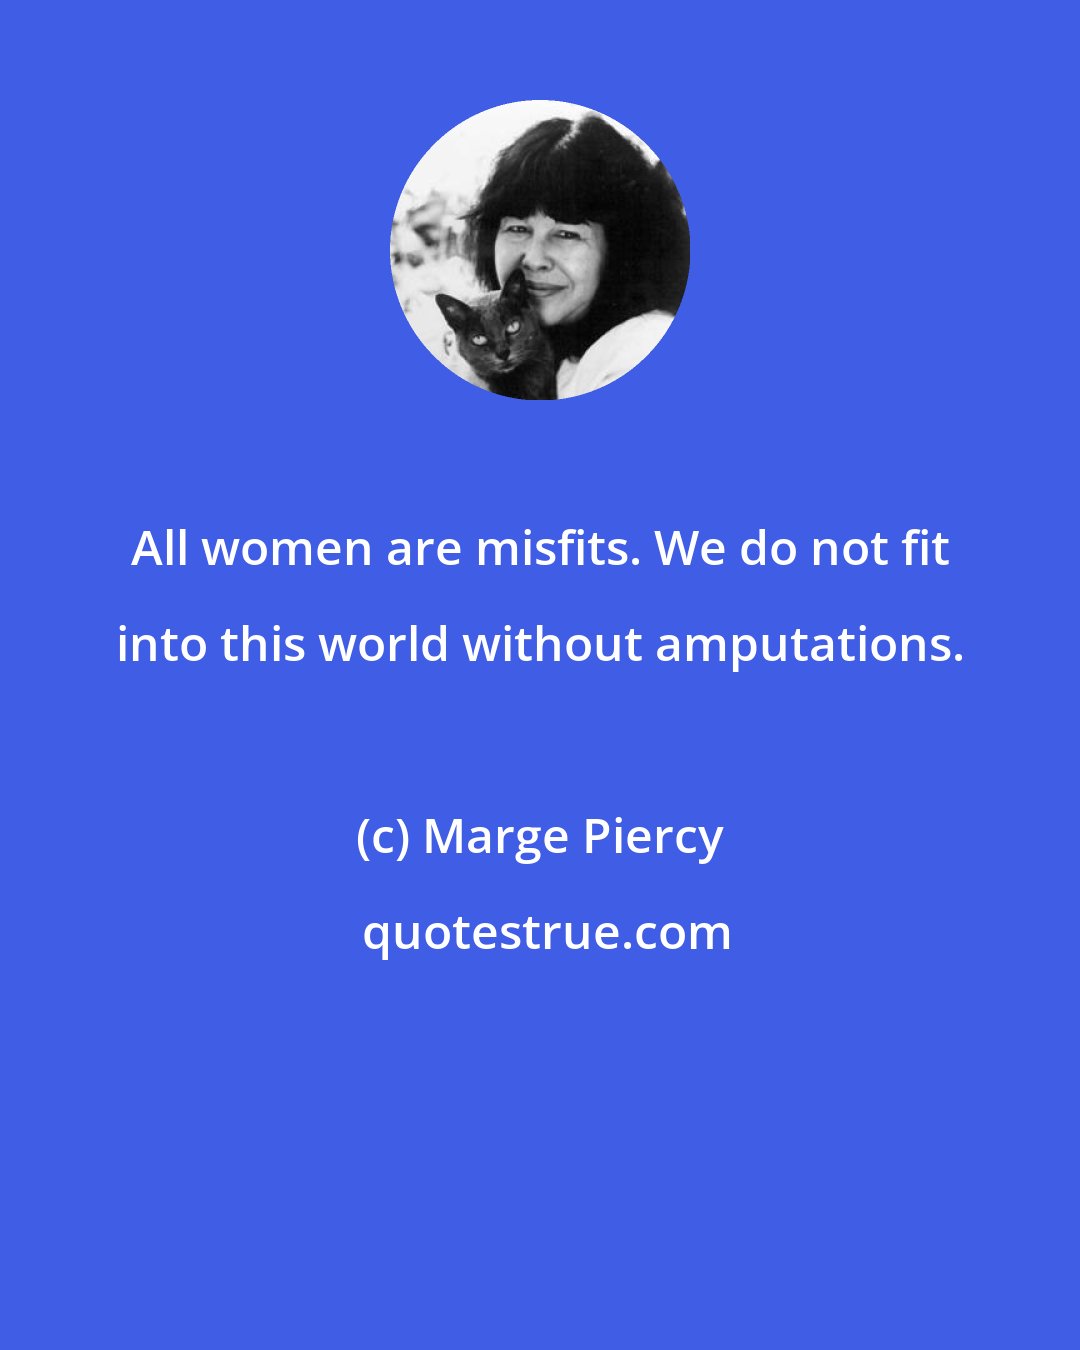 Marge Piercy: All women are misfits. We do not fit into this world without amputations.